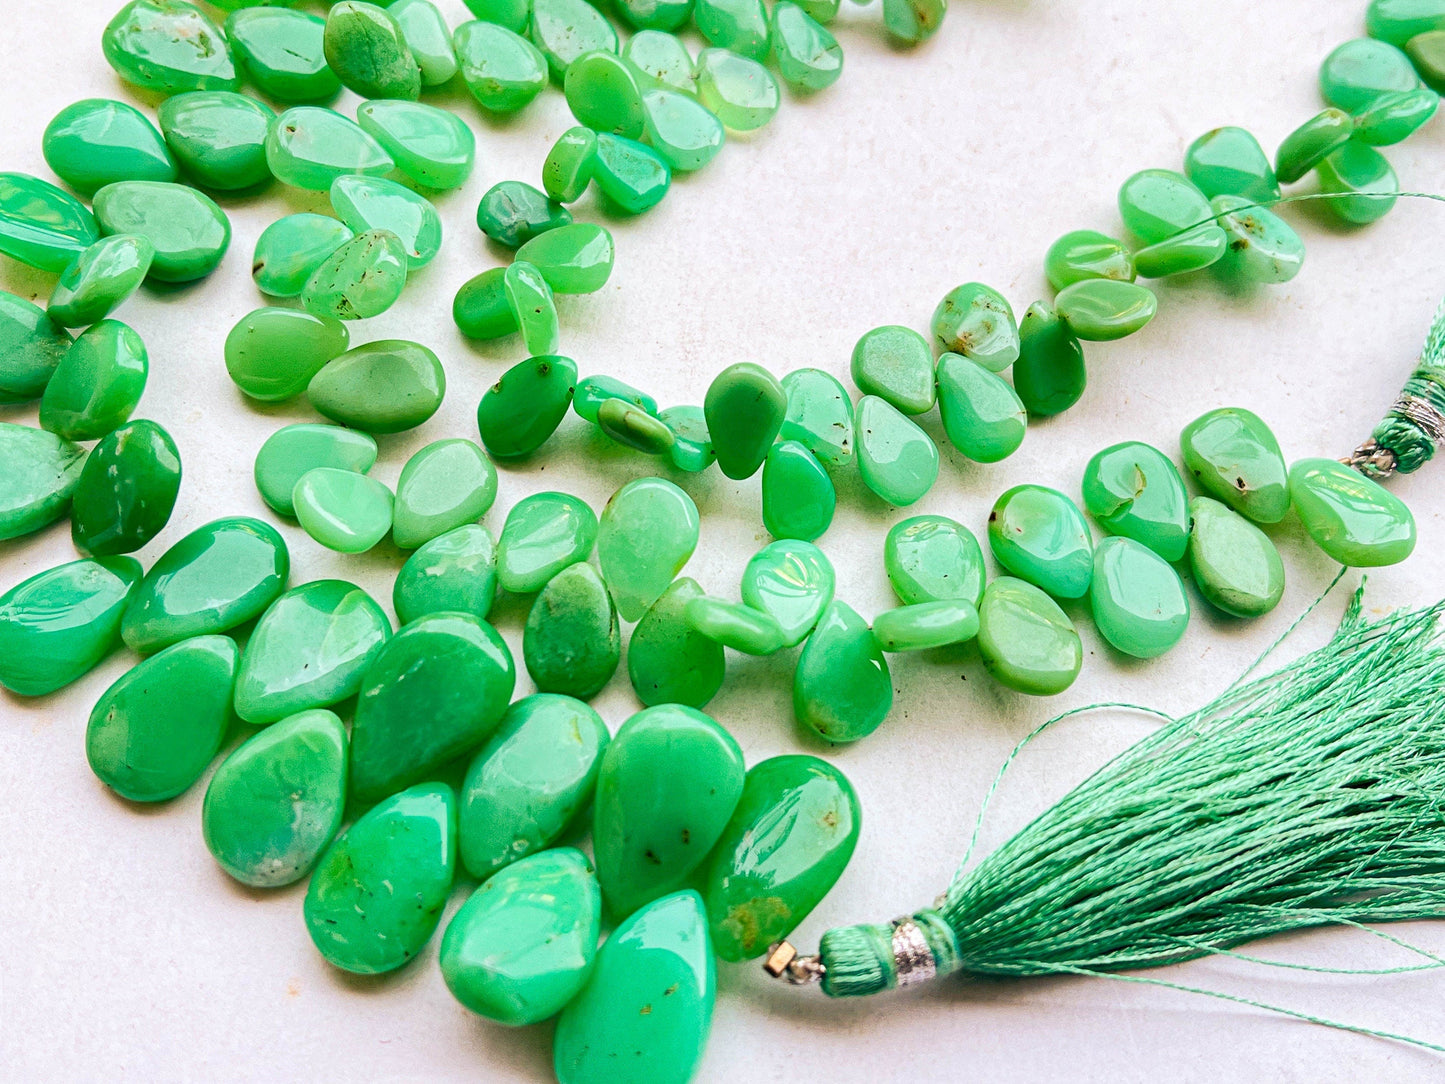 Natural Chrysoprase Smooth Pear Shape Briolette Beads, 8 Inch Beadsforyourjewelry